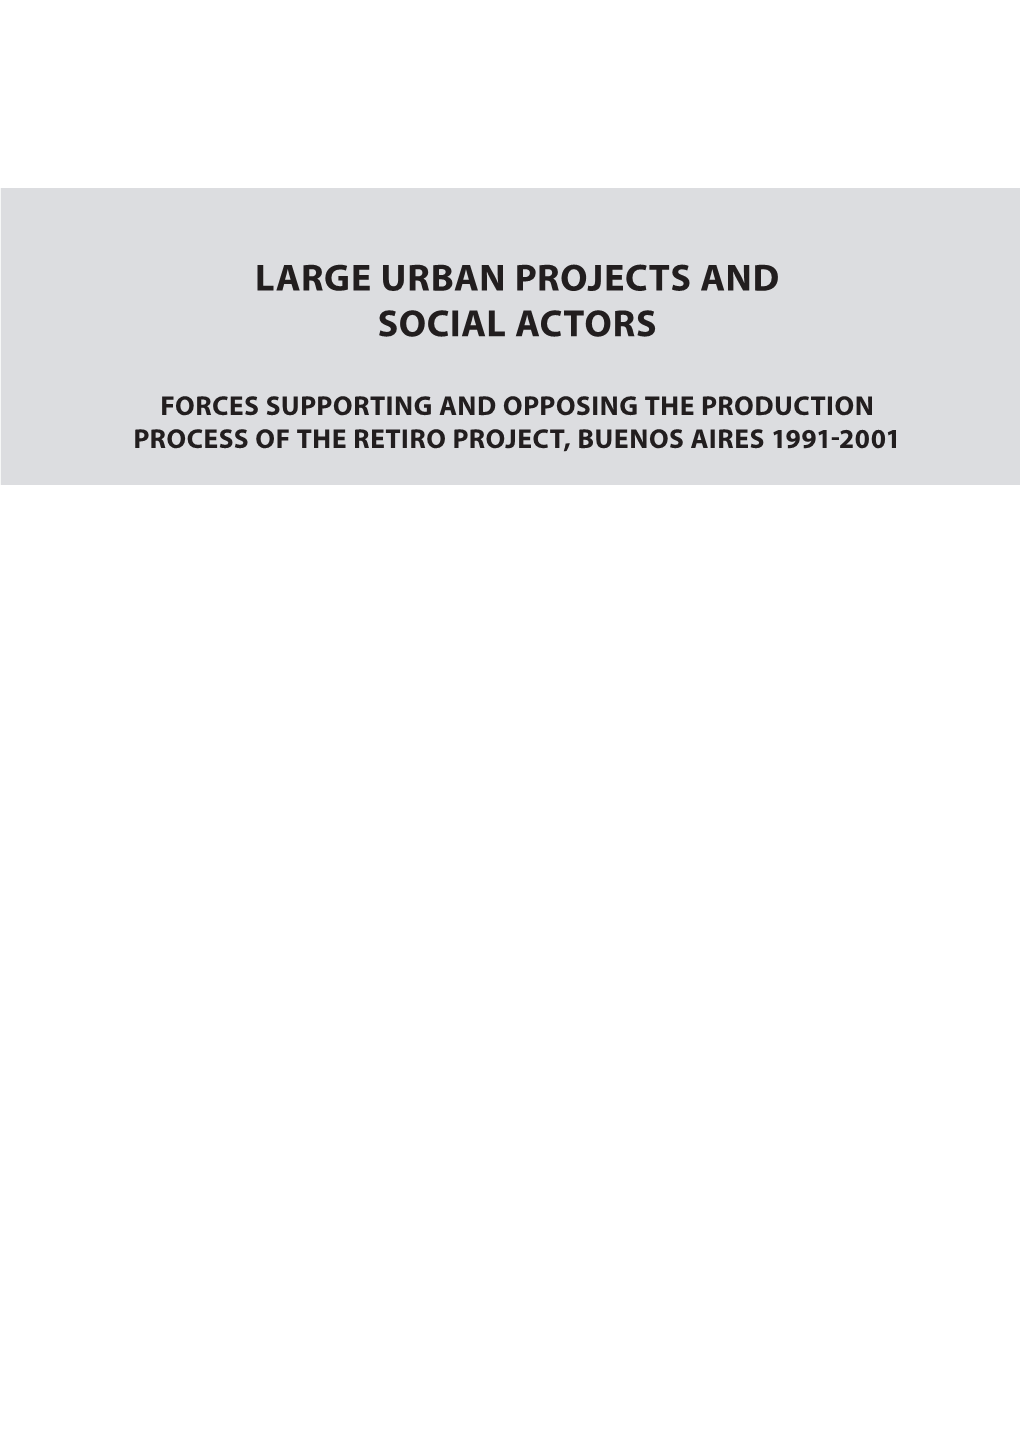 Large Urban Projects and Social Actors